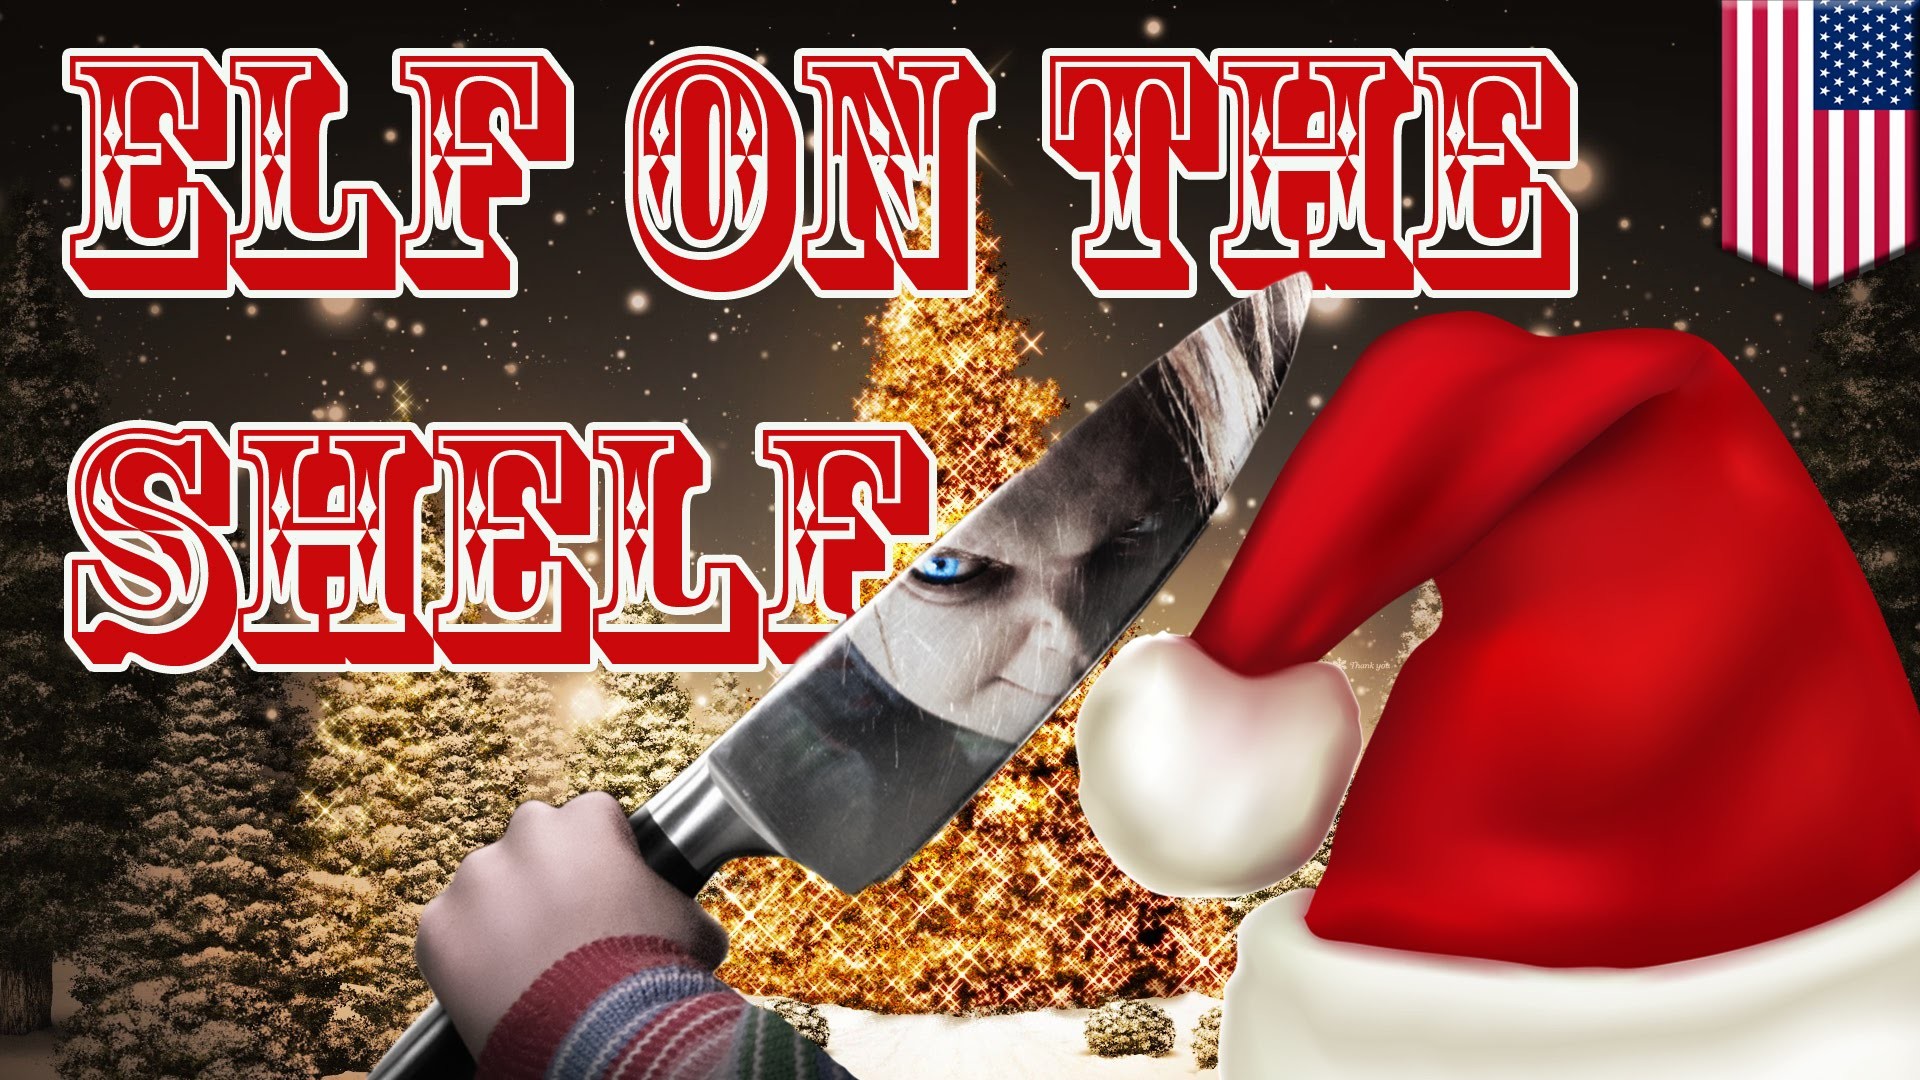 Christmas Elf On The Shelf Is Moving Hide Your Kids, - Christmas , HD Wallpaper & Backgrounds